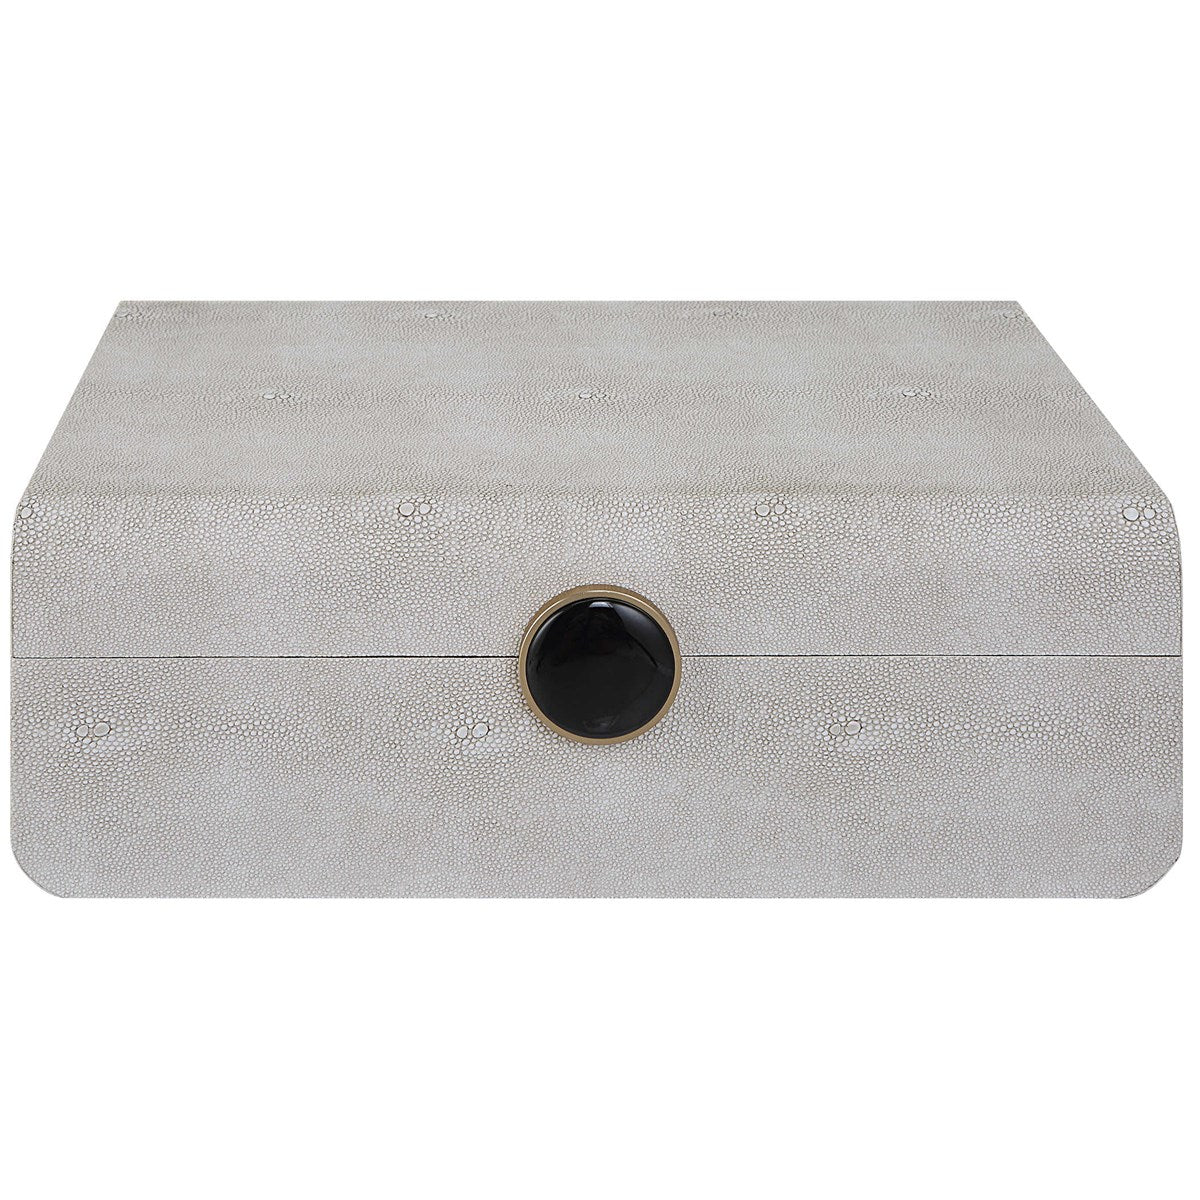 Closed white box with black button and gold trim surrounding the button. Box closed shut and displayed on an all white background. 